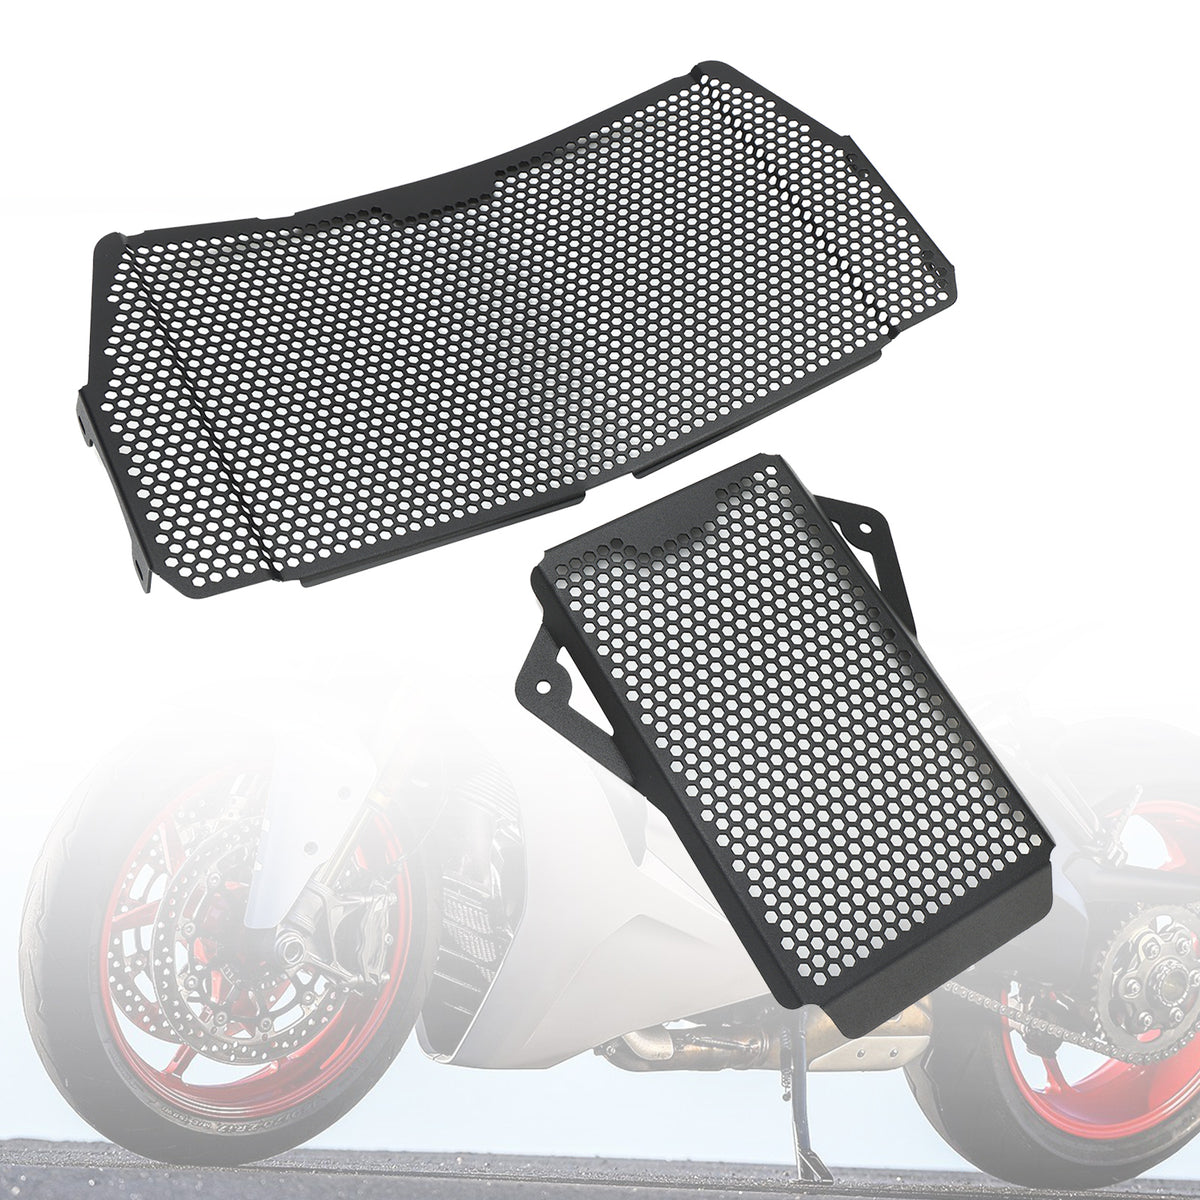 Radiator Guard Protector Radiator Cover Fits For Ducati Supersport 930 950 21-23